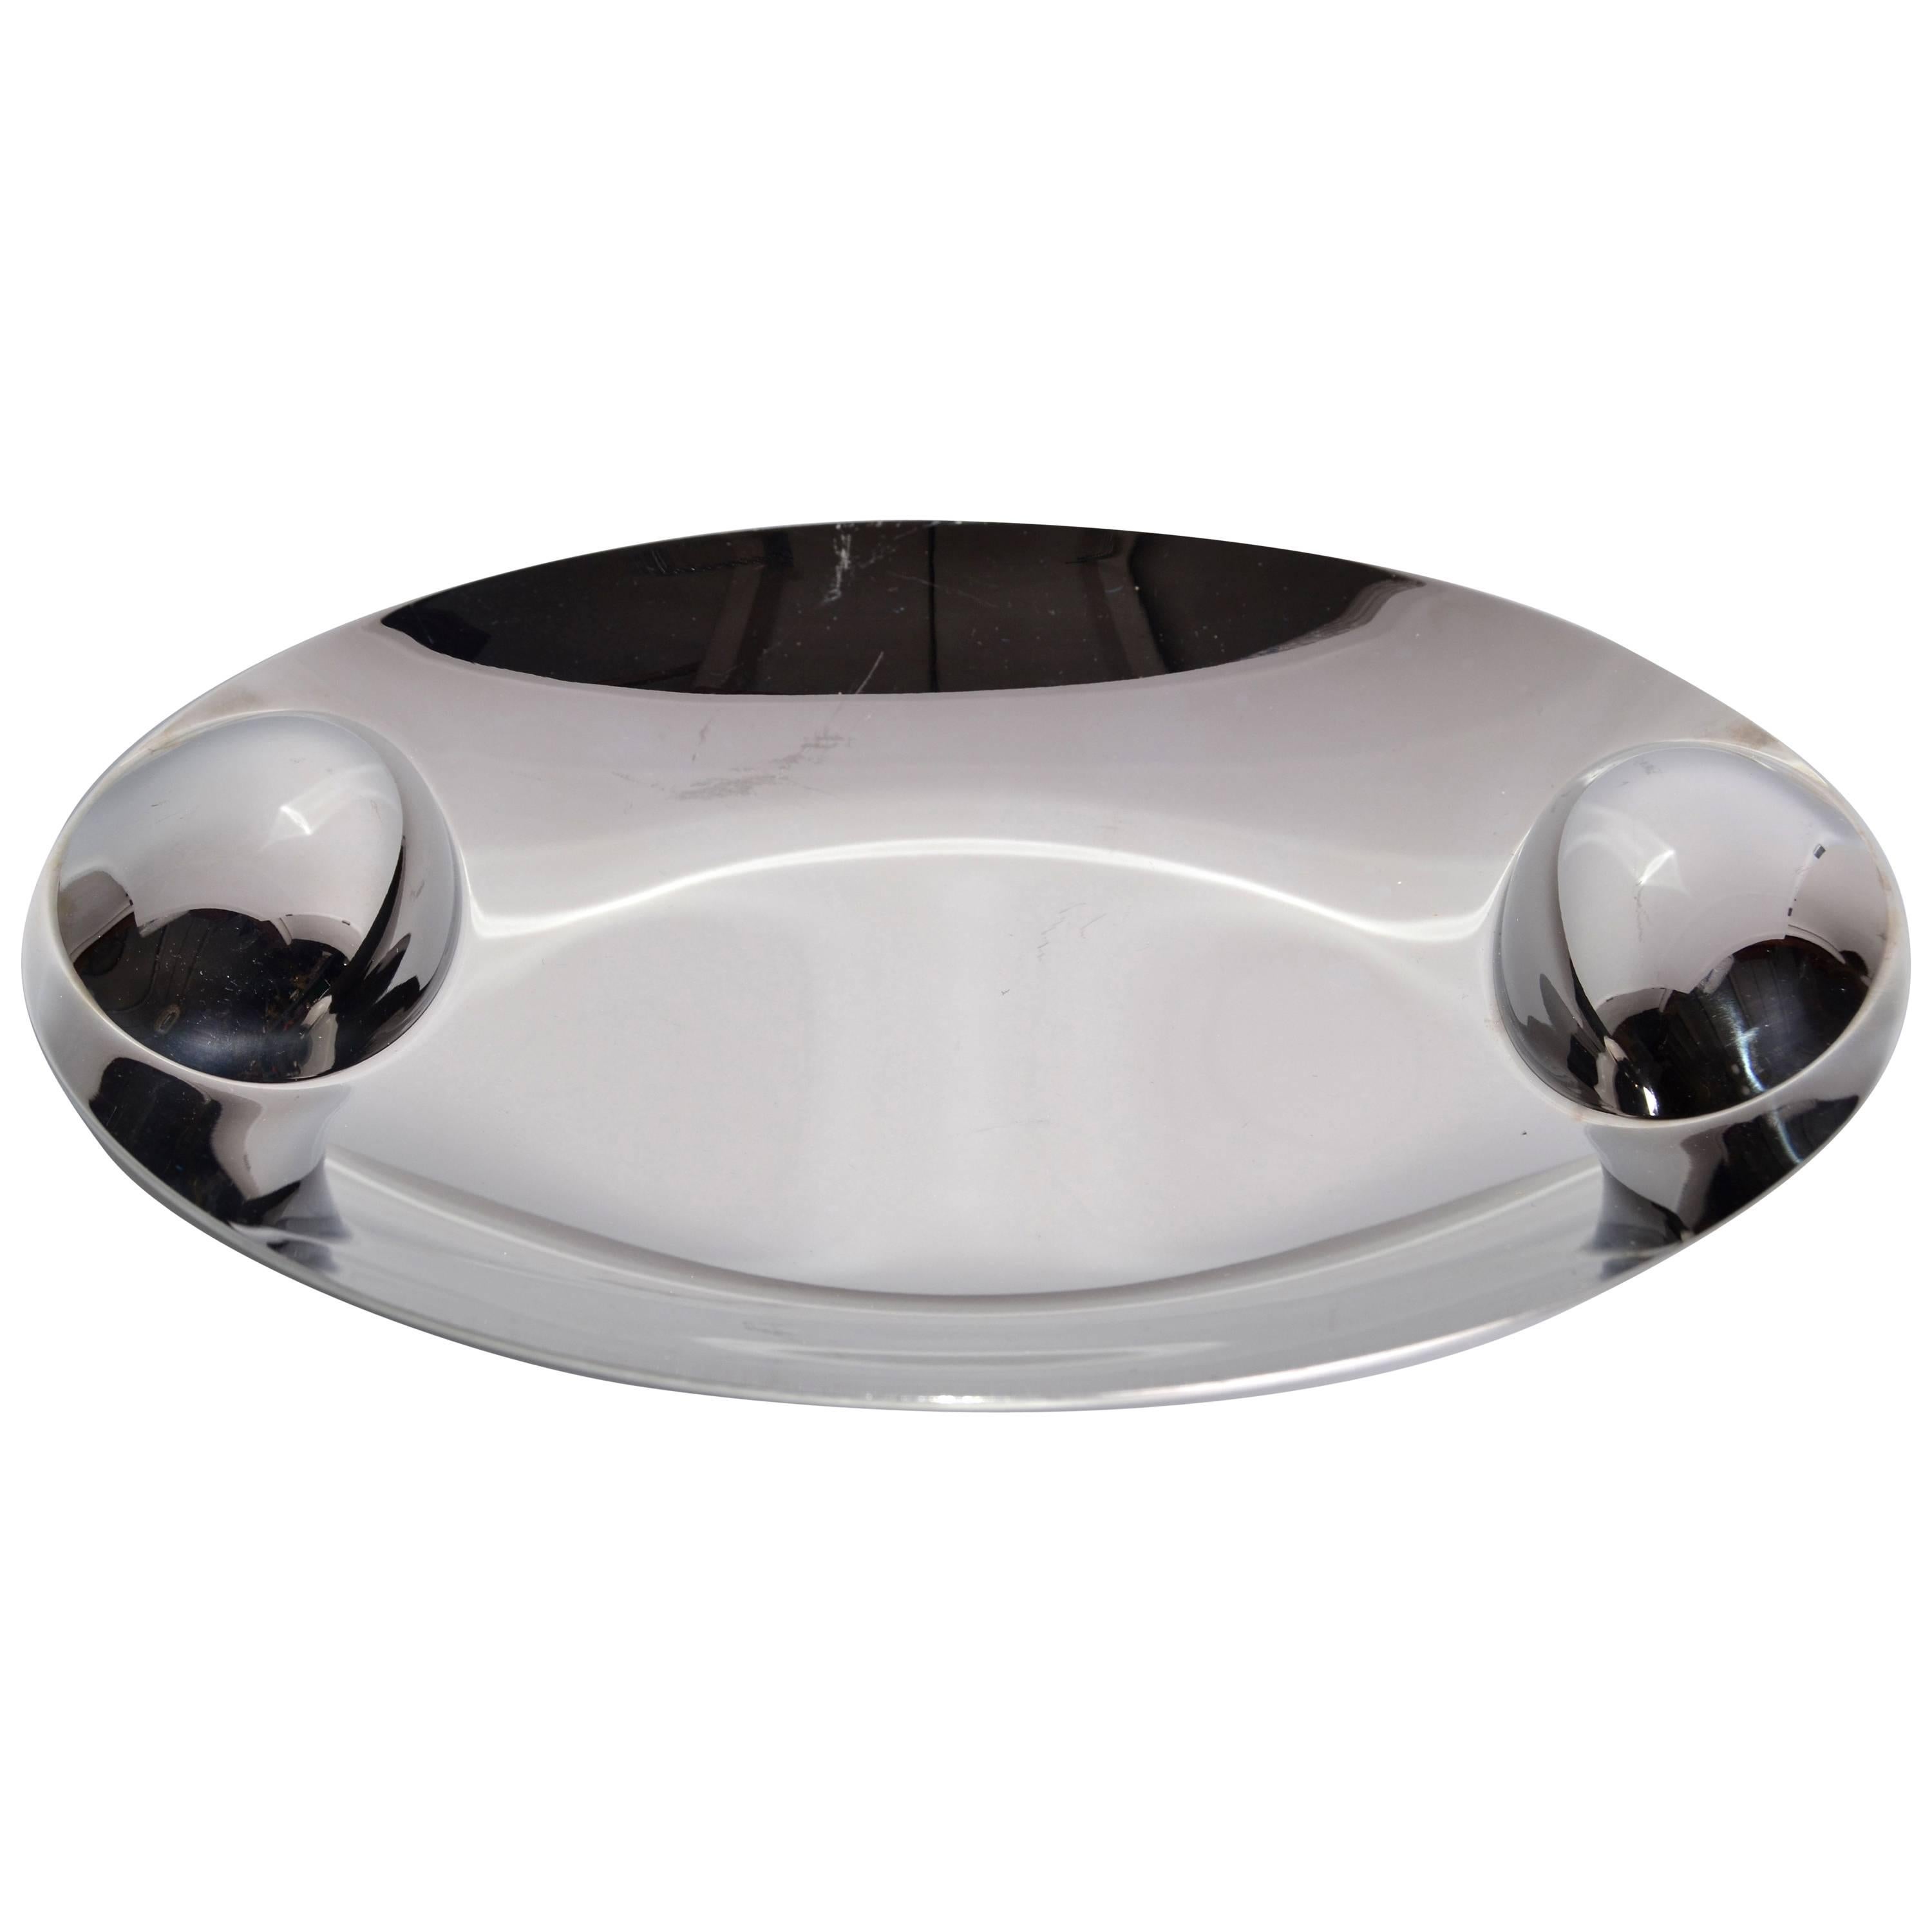 Stainless Steel Plate or Bowl by Lino Sabattini